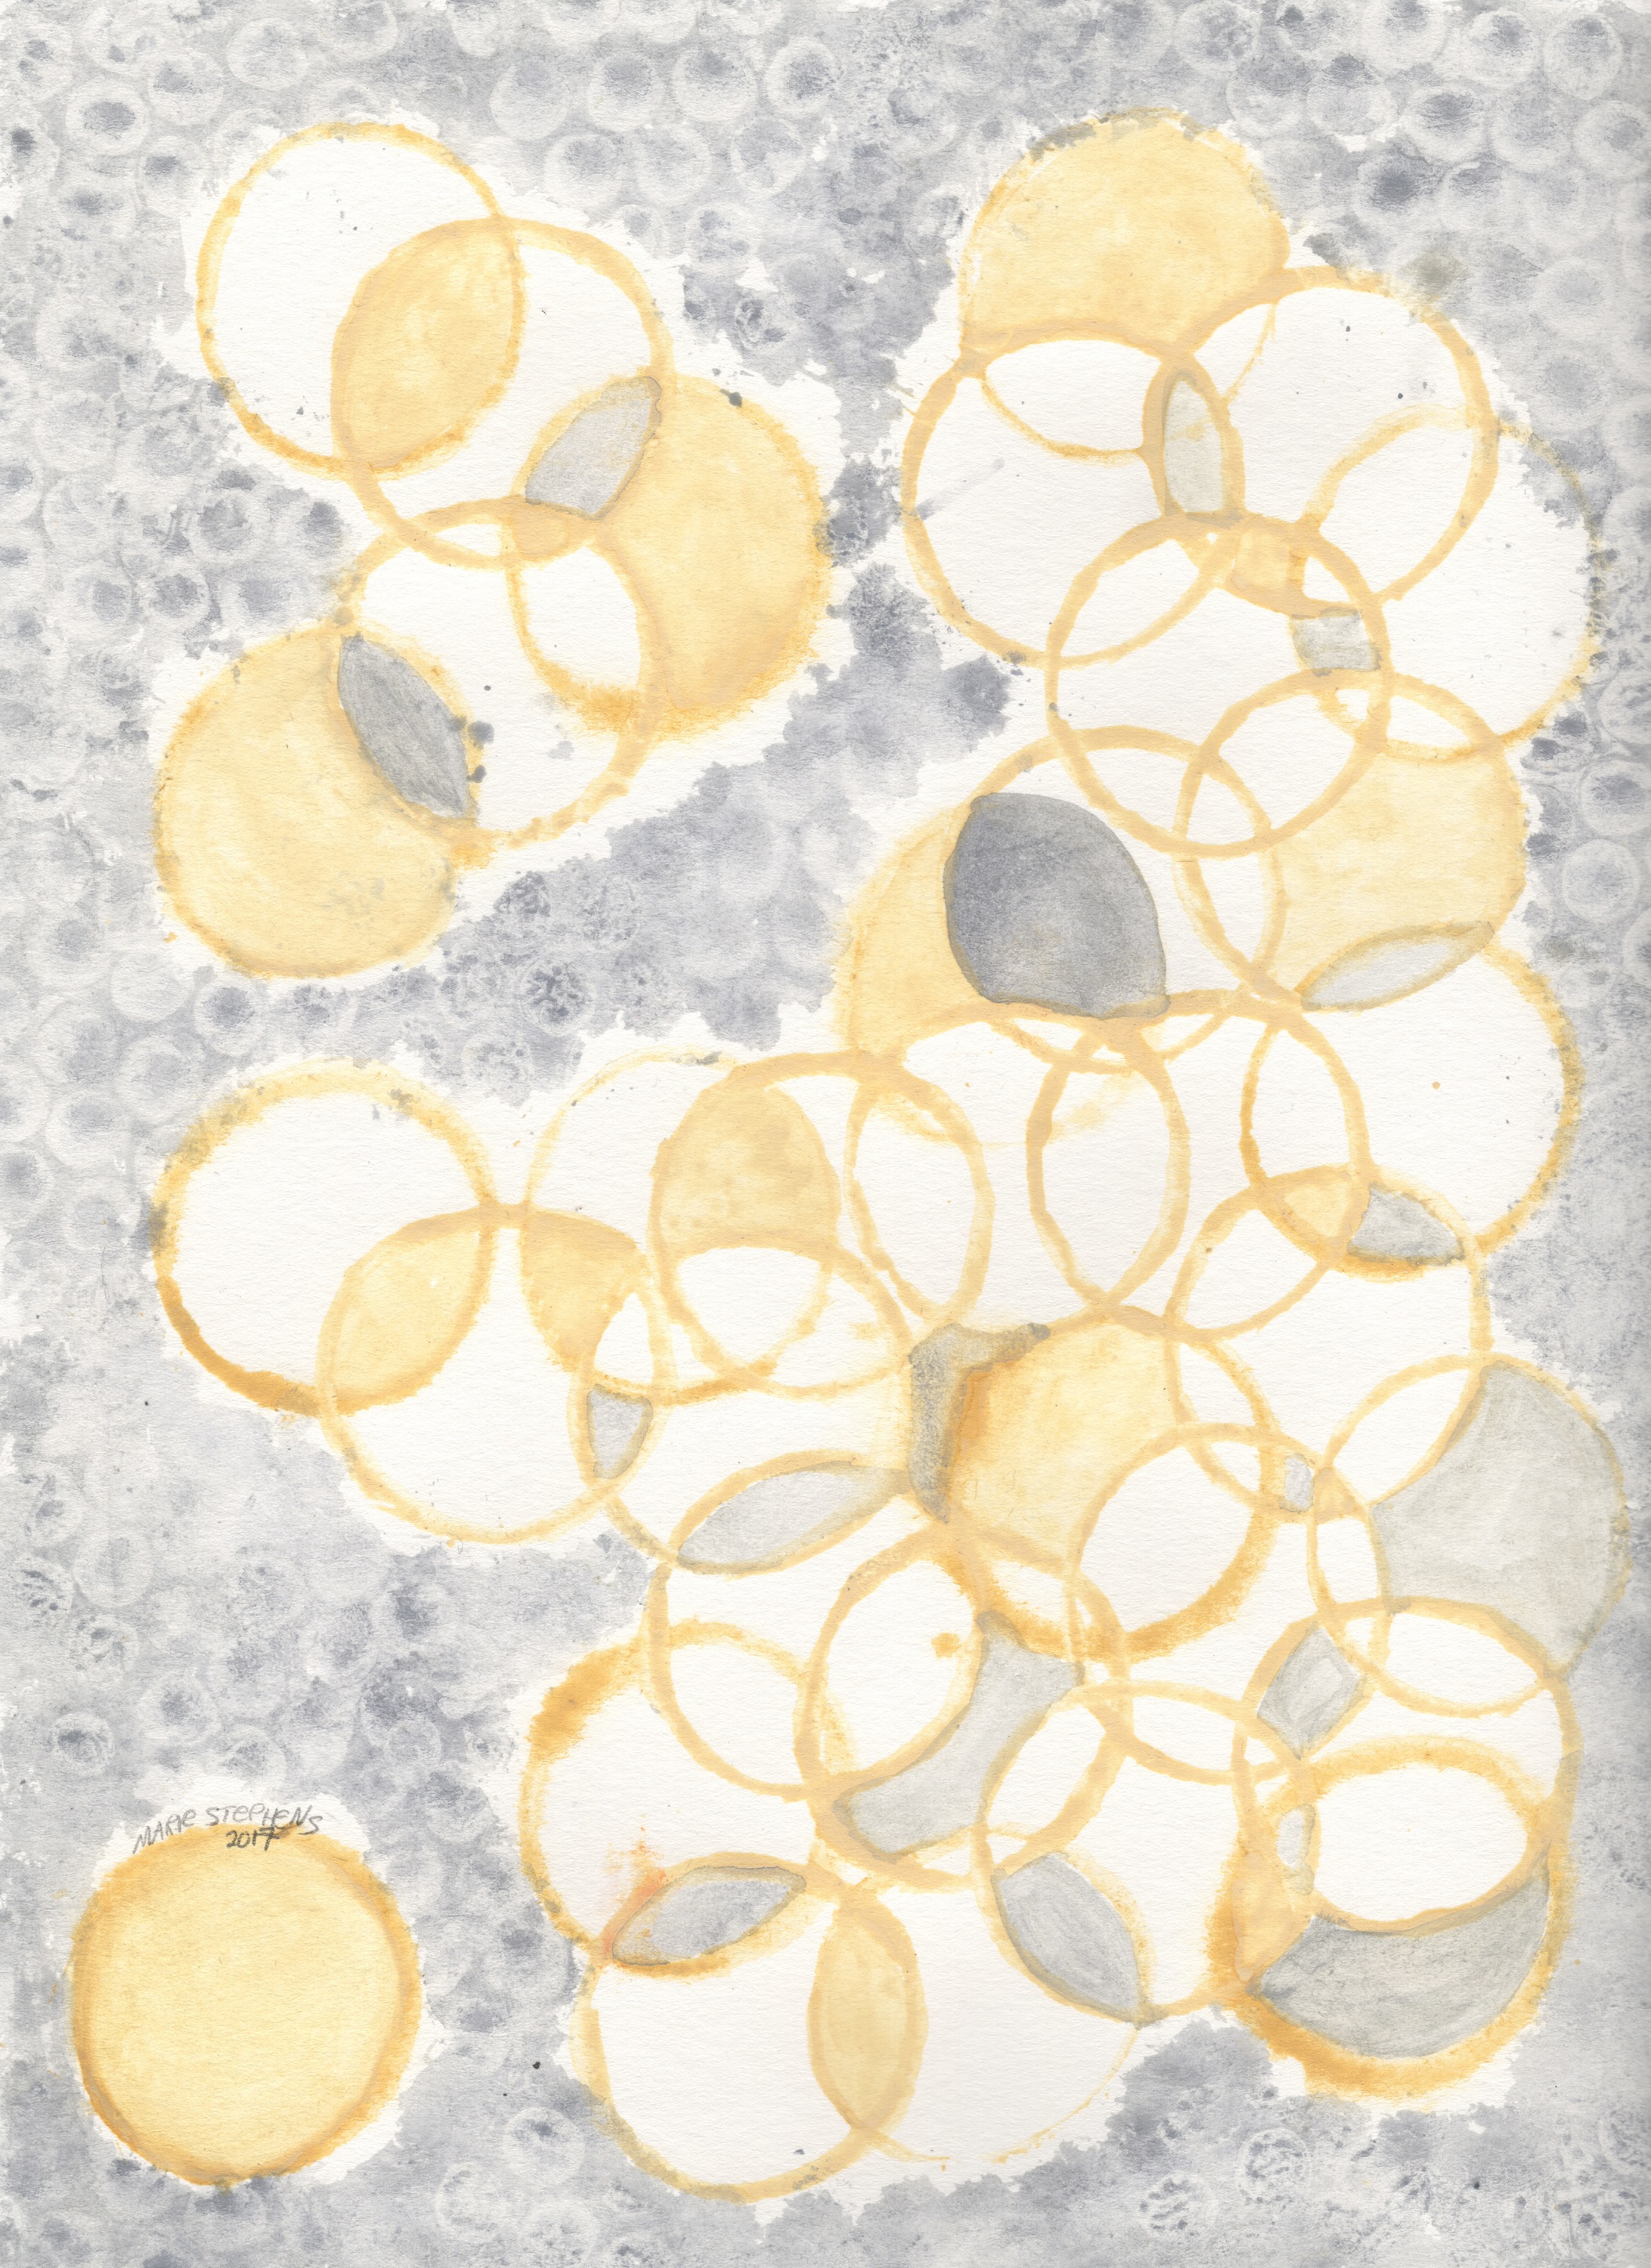 Abstract pale dijon mustard yellow light gray circles and bubbles water color study 2017 mariestephensart zbys4j